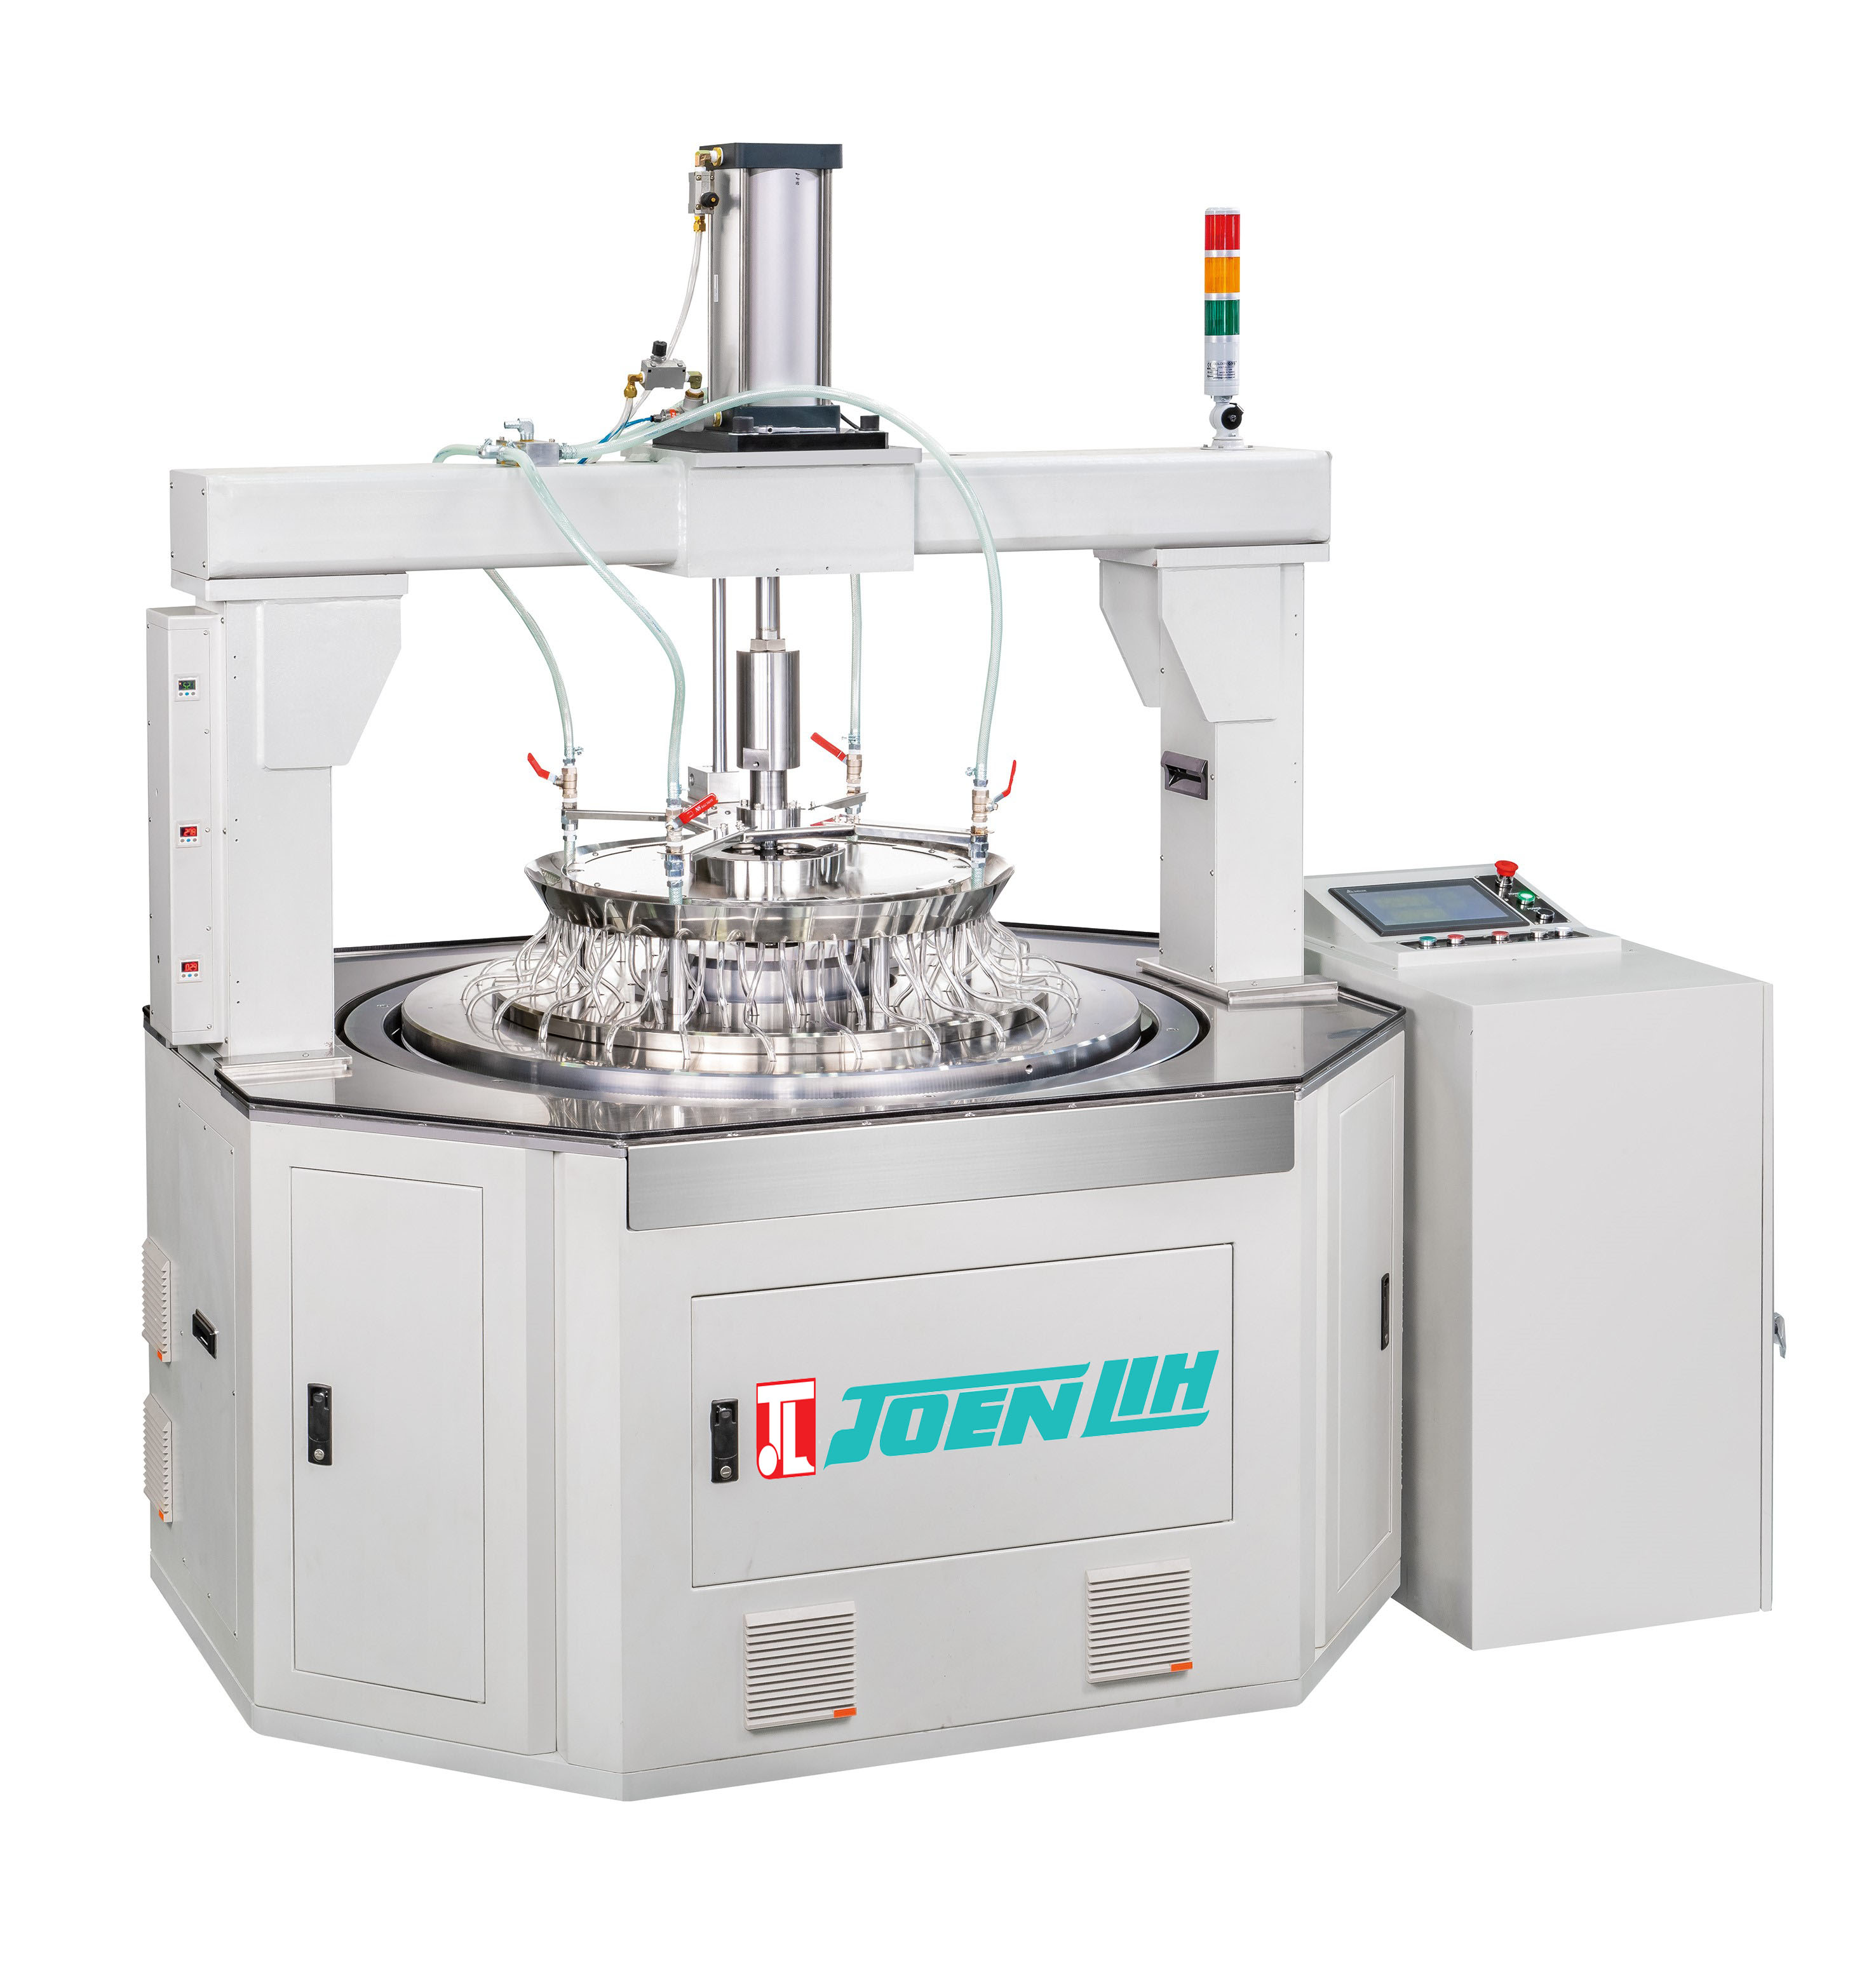 Products|Double-sided Lapping/Polishing Machine